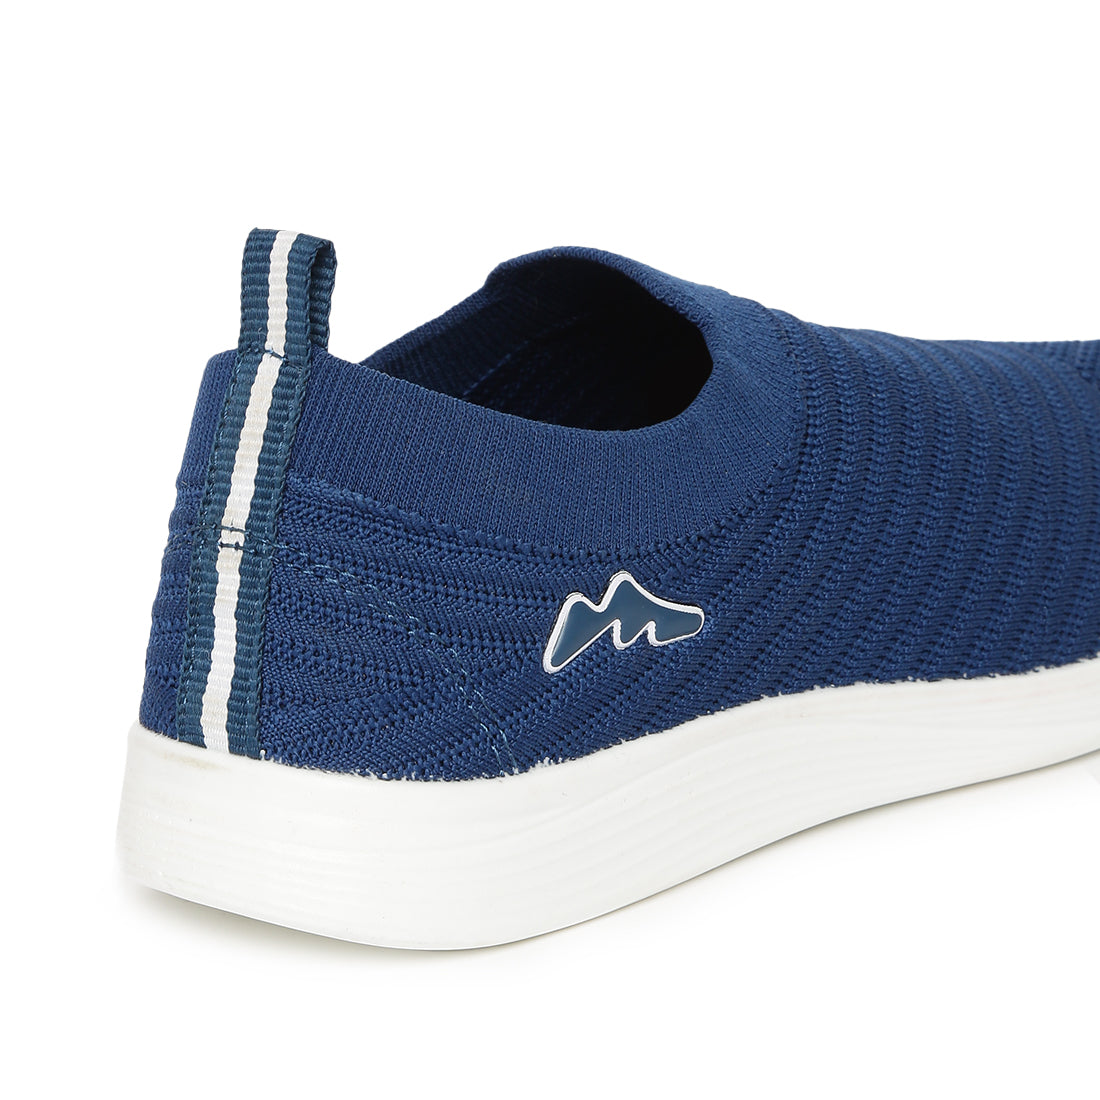 Stimulus PUSTL5010AP Blue Stylish Daily Comfortable Casual Shoes For Women